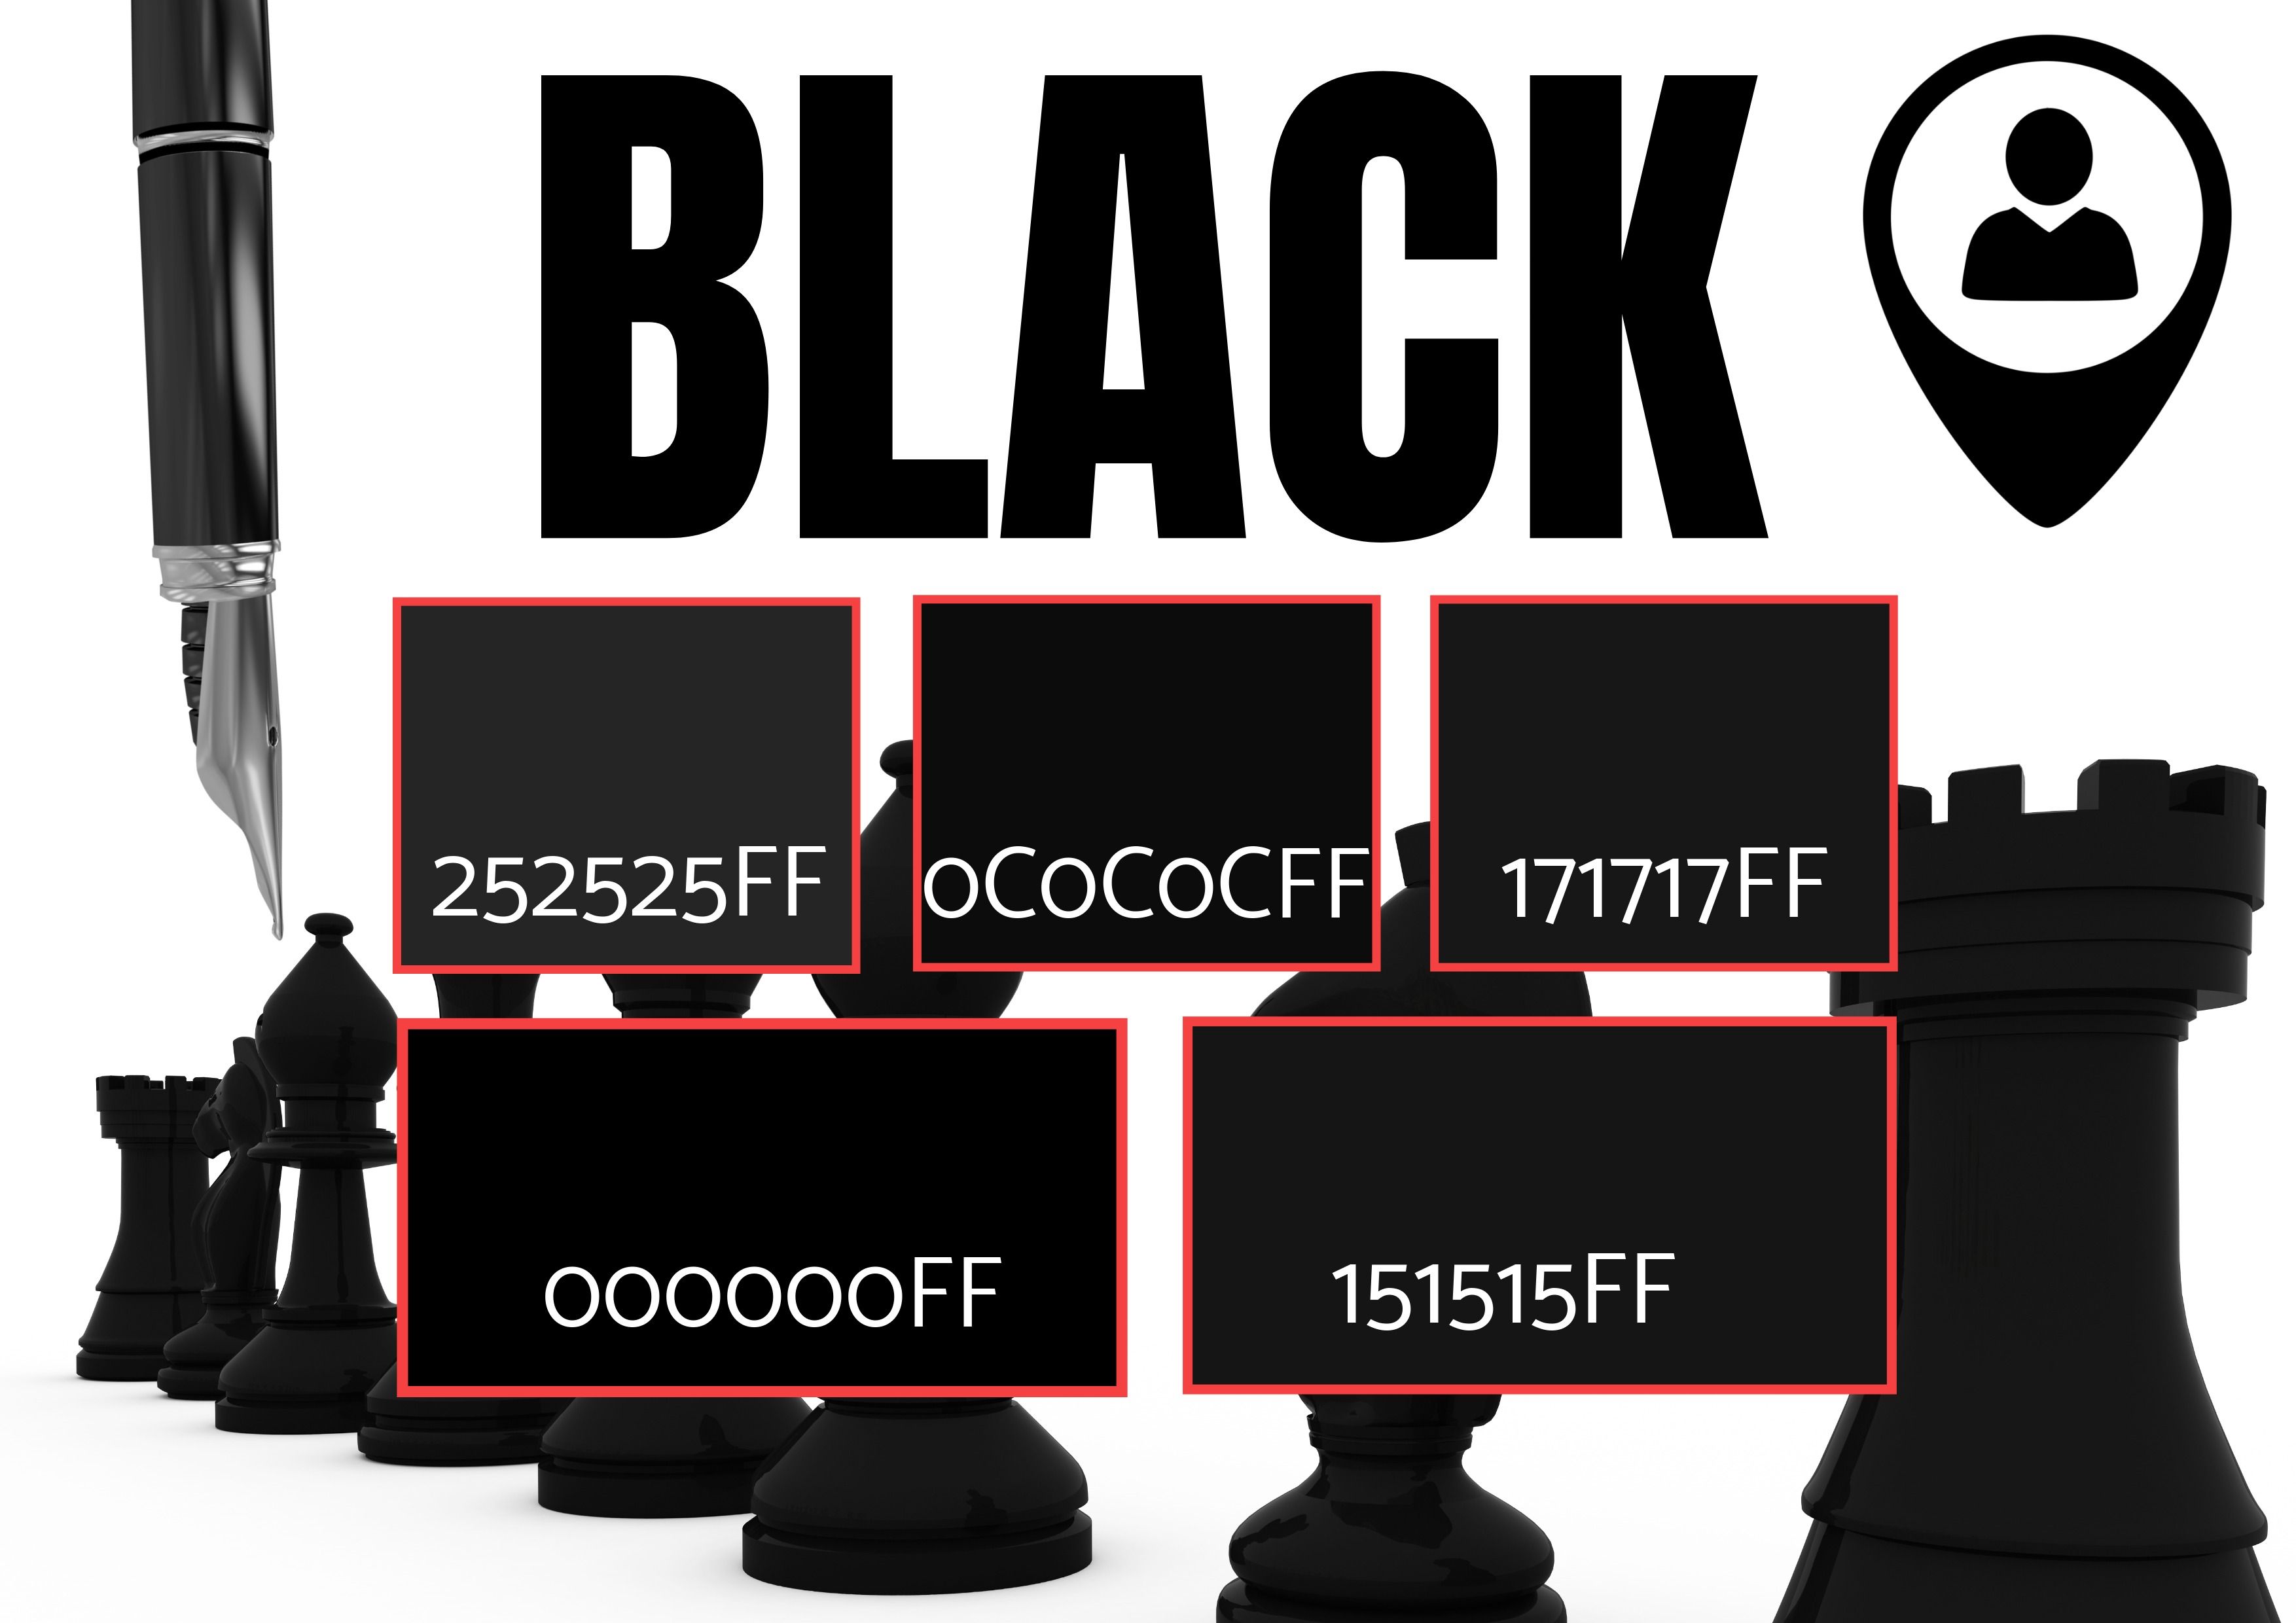 Selection of 5 Black Shades with images of chess pieces, pen and a location icon - symbolism - Color theory for designers: The art of using color symbolism - Image